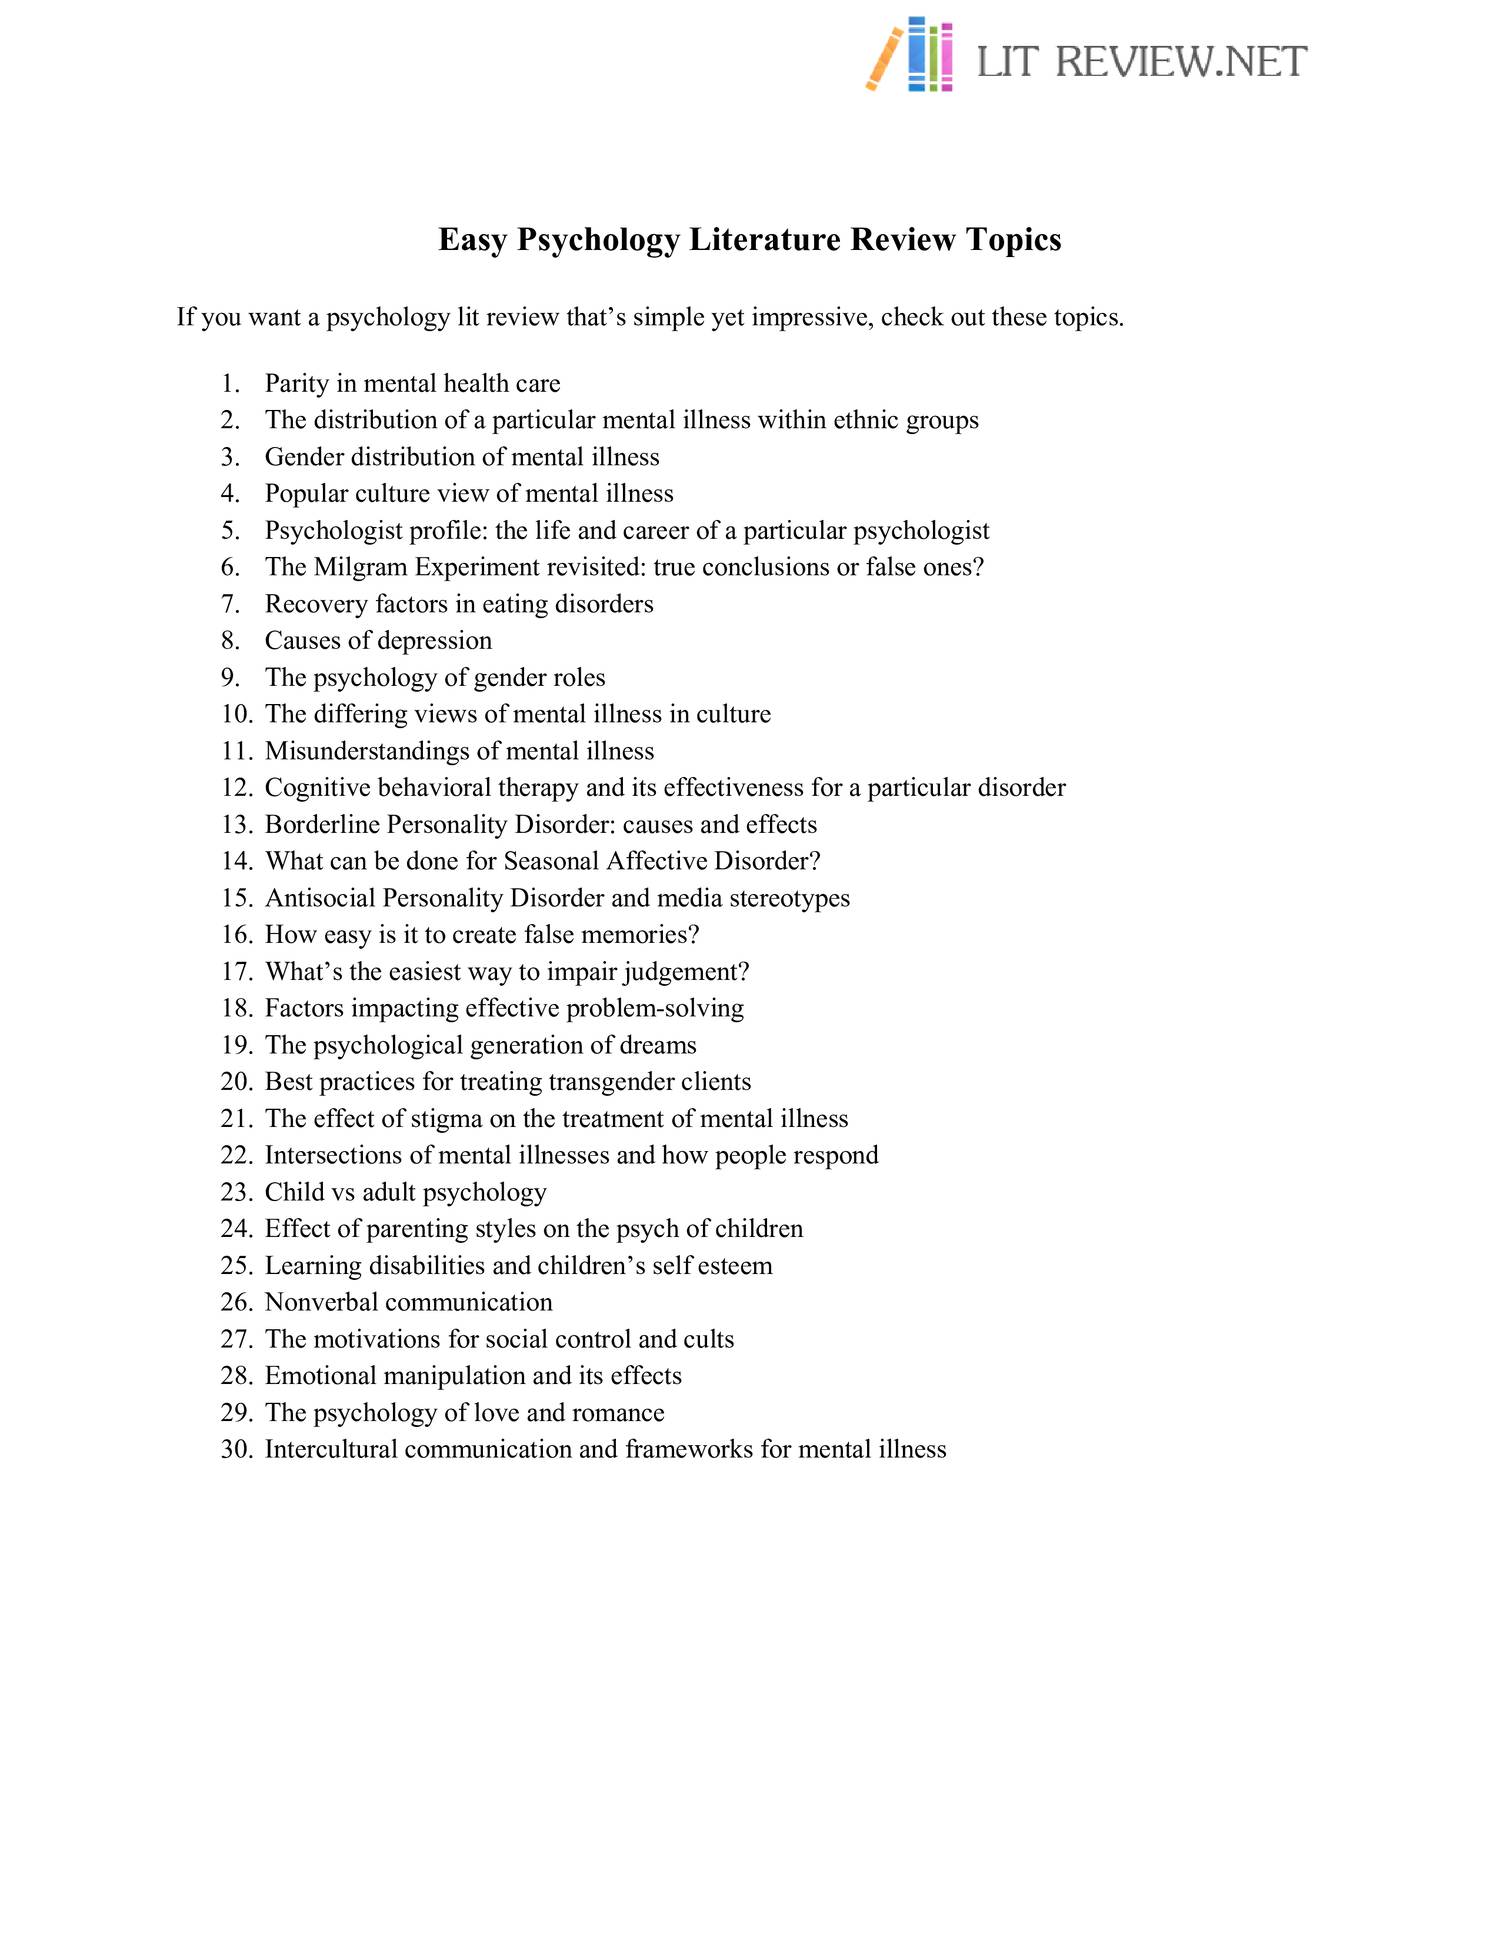 research paper topics for psychology